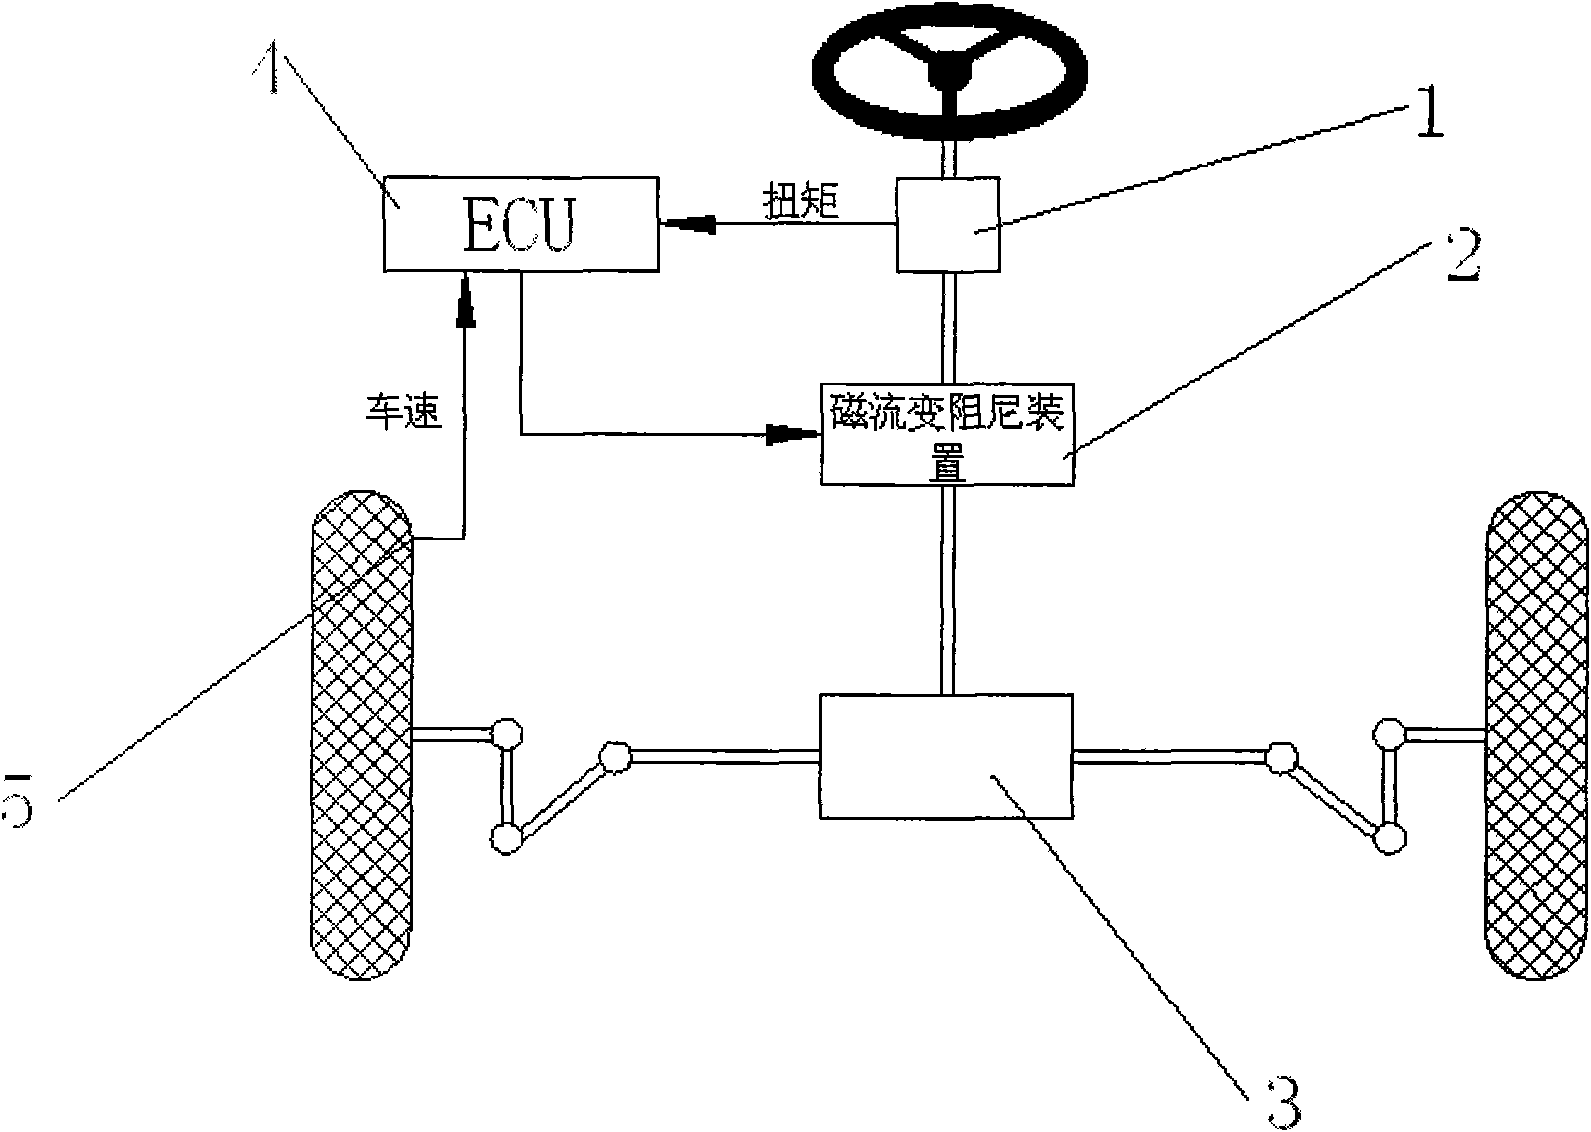 Auto steering control method and system based on magnetorheological technique